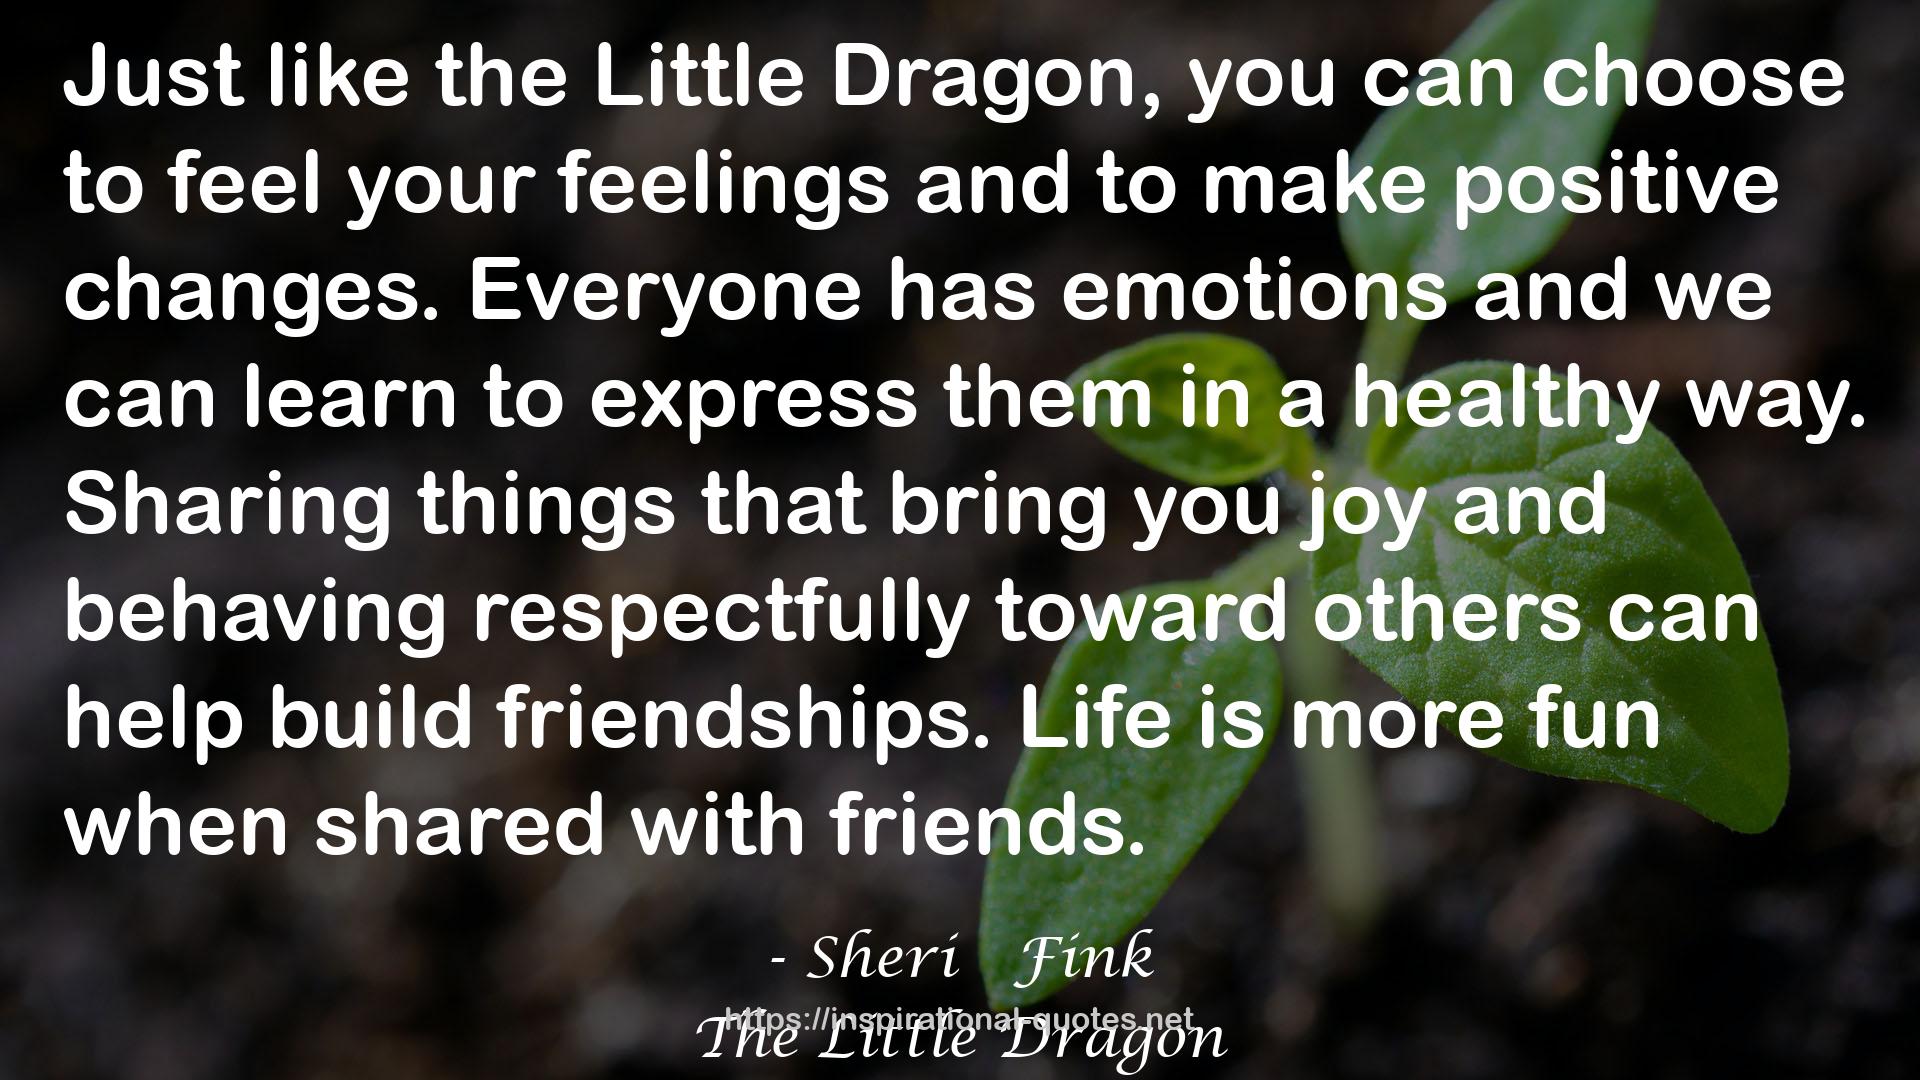 The Little Dragon QUOTES